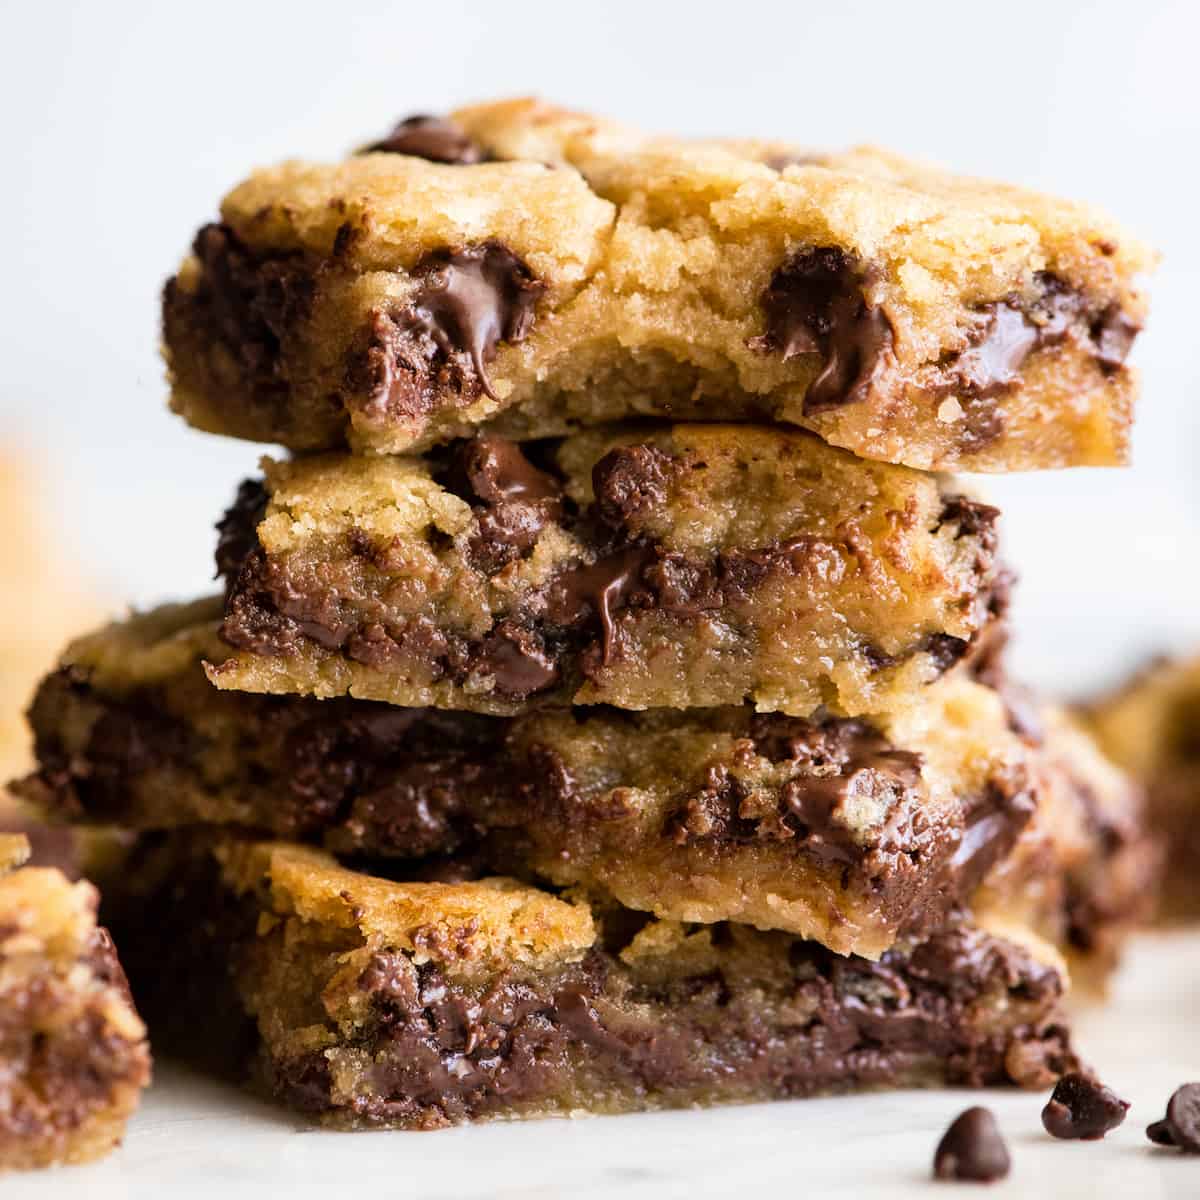 stack of 4 Chocolate Chip Cookie Bars - the top one has a bite taken out of it. 